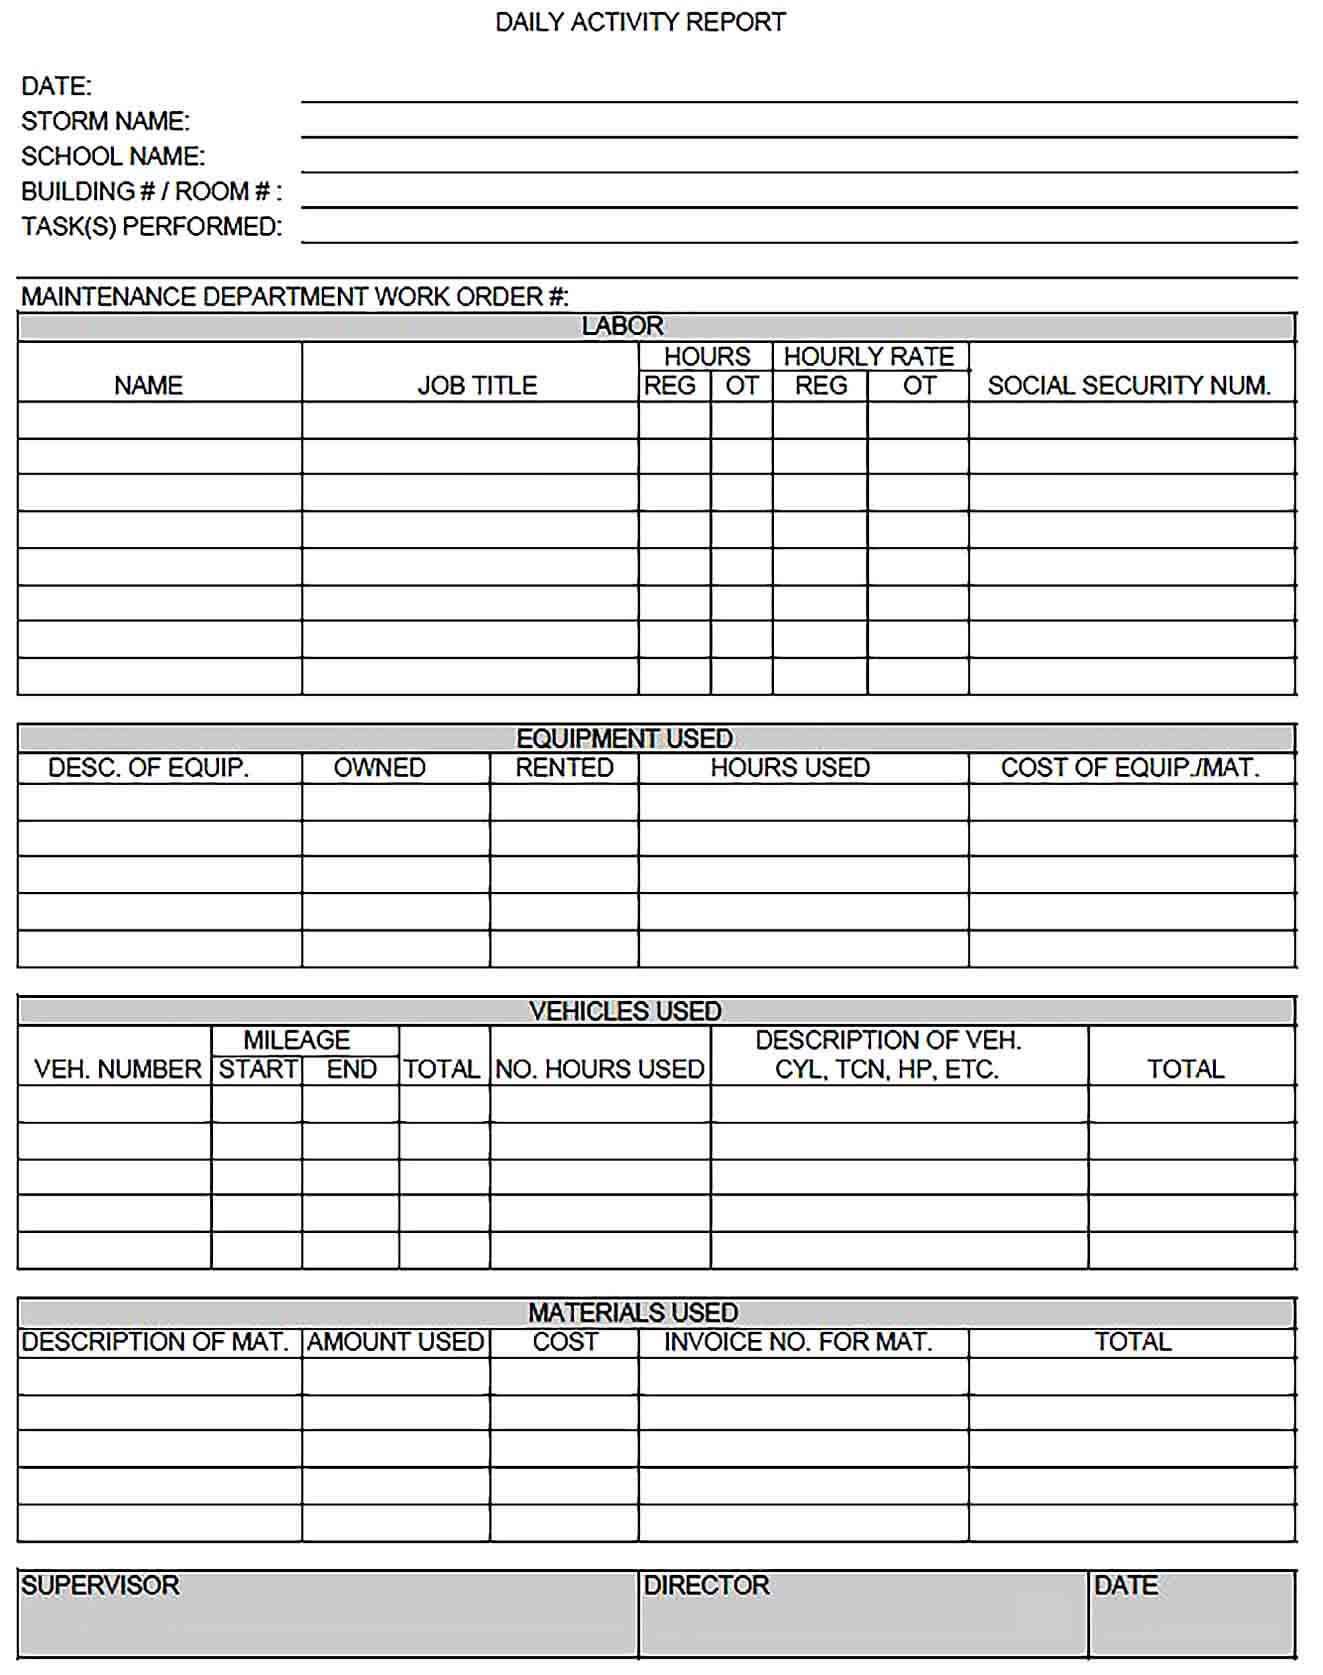 Sample Daily Activity Report Template Sample